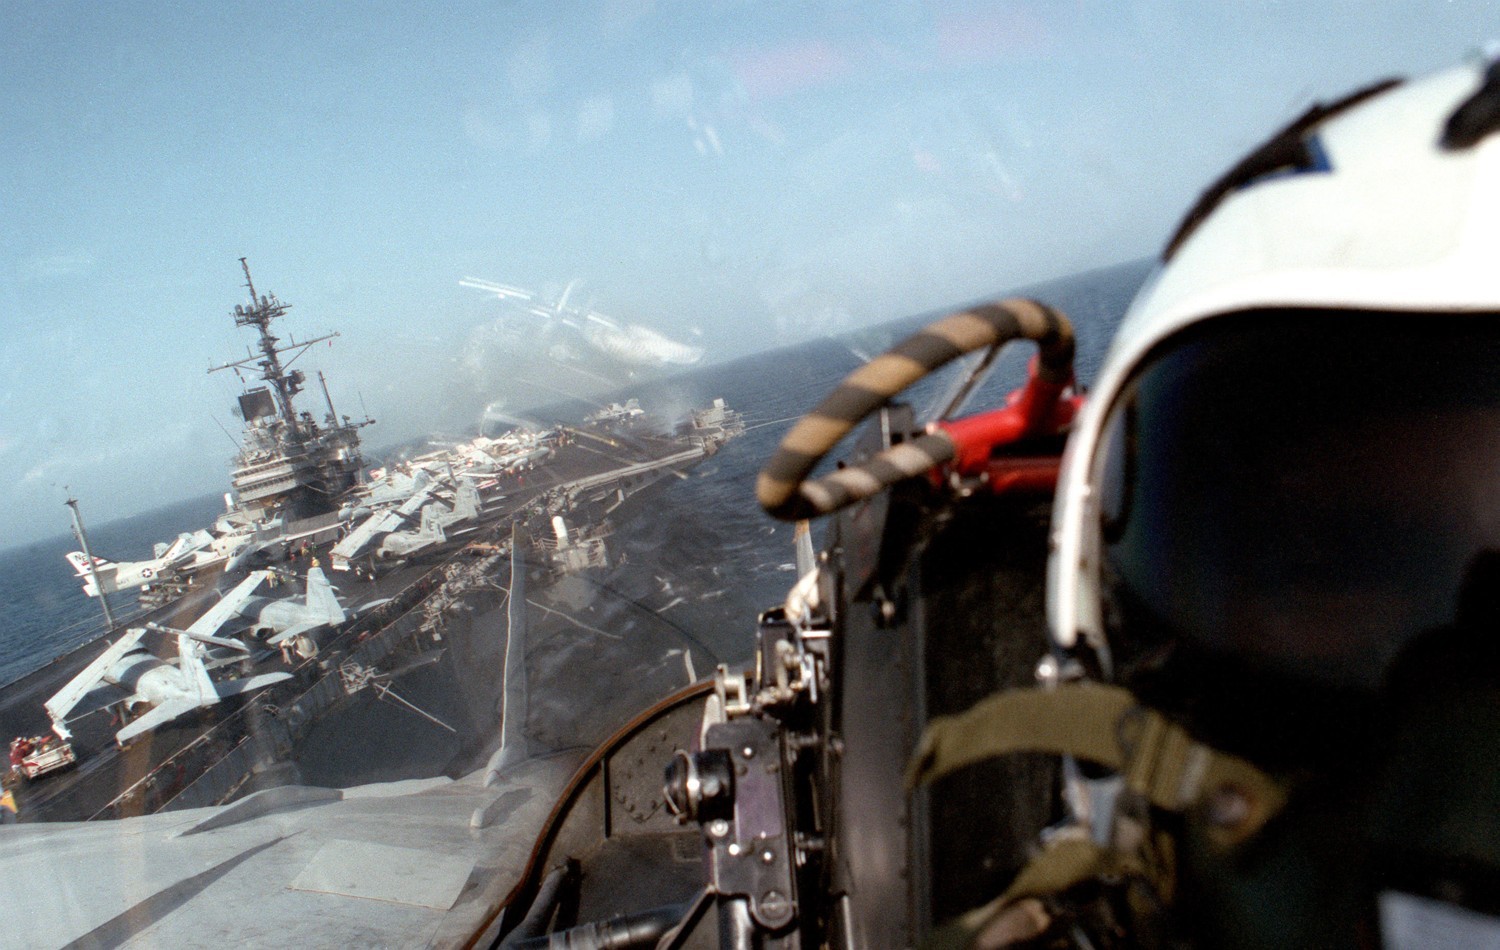 vf-2 bounty hunters fighter squadron fitron f-14a tomcat carrier air wing cvw-2 uss ranger cv-61 94